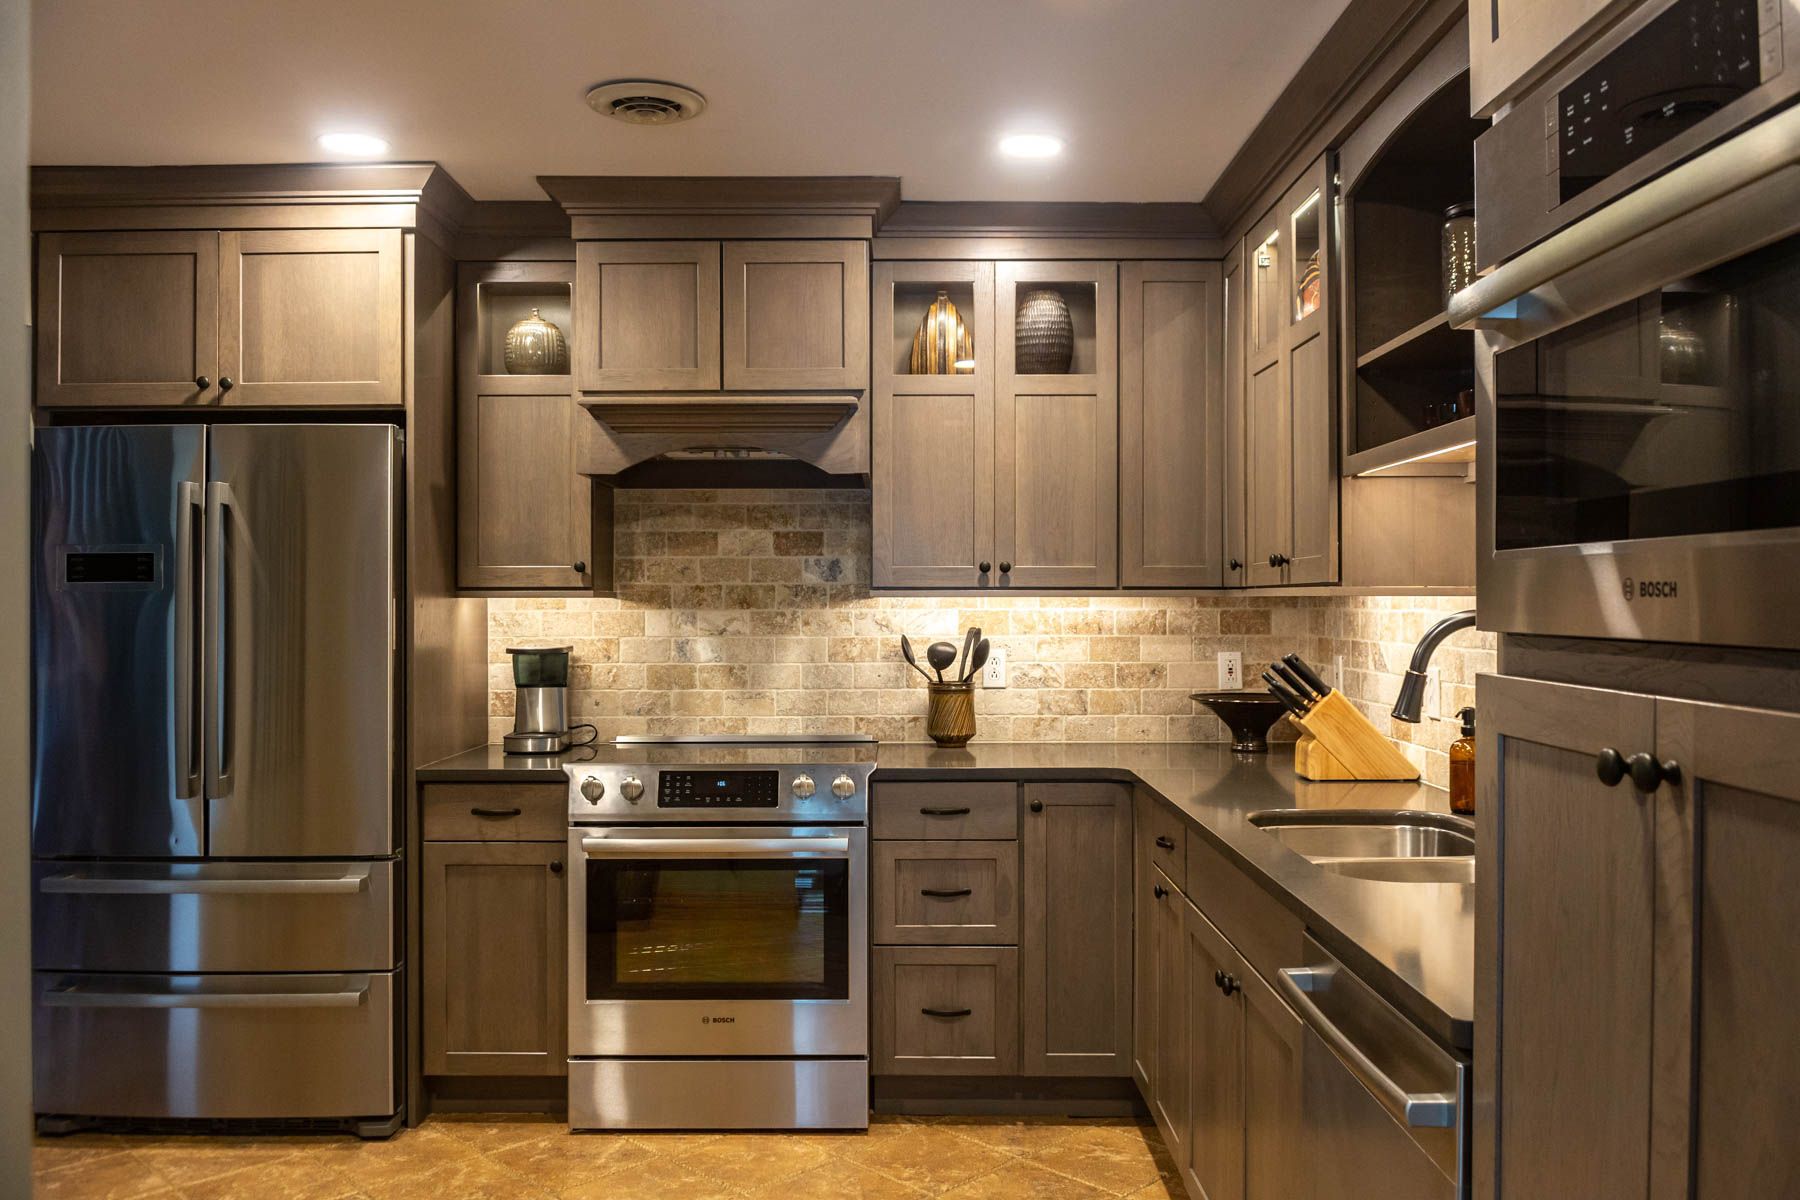 The Art of Luxury Kitchen Cabinets: Designing for Distinction